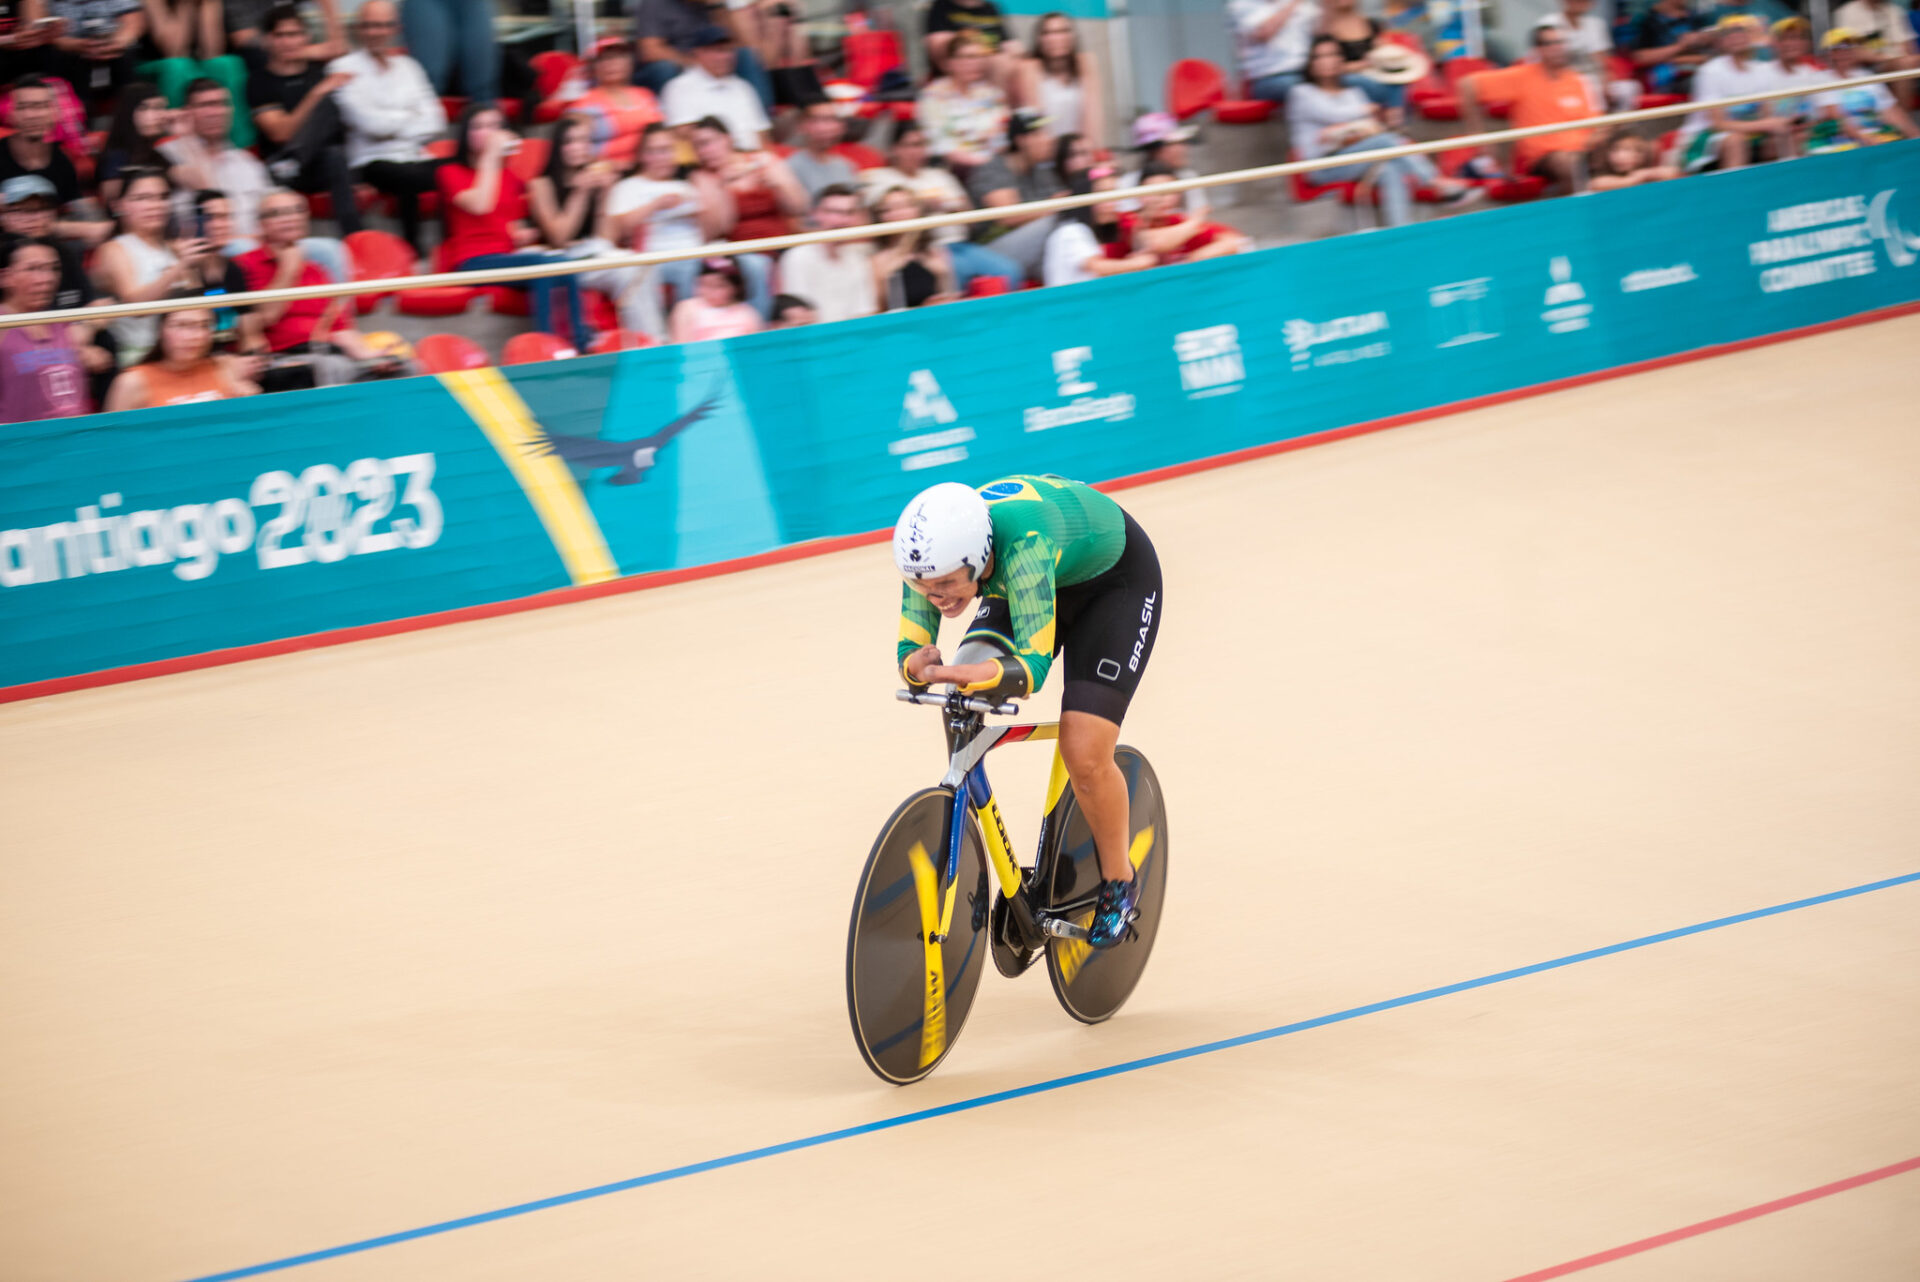 Santiago 2023: Brazil advances to cycling and badminton finals on final day of competition